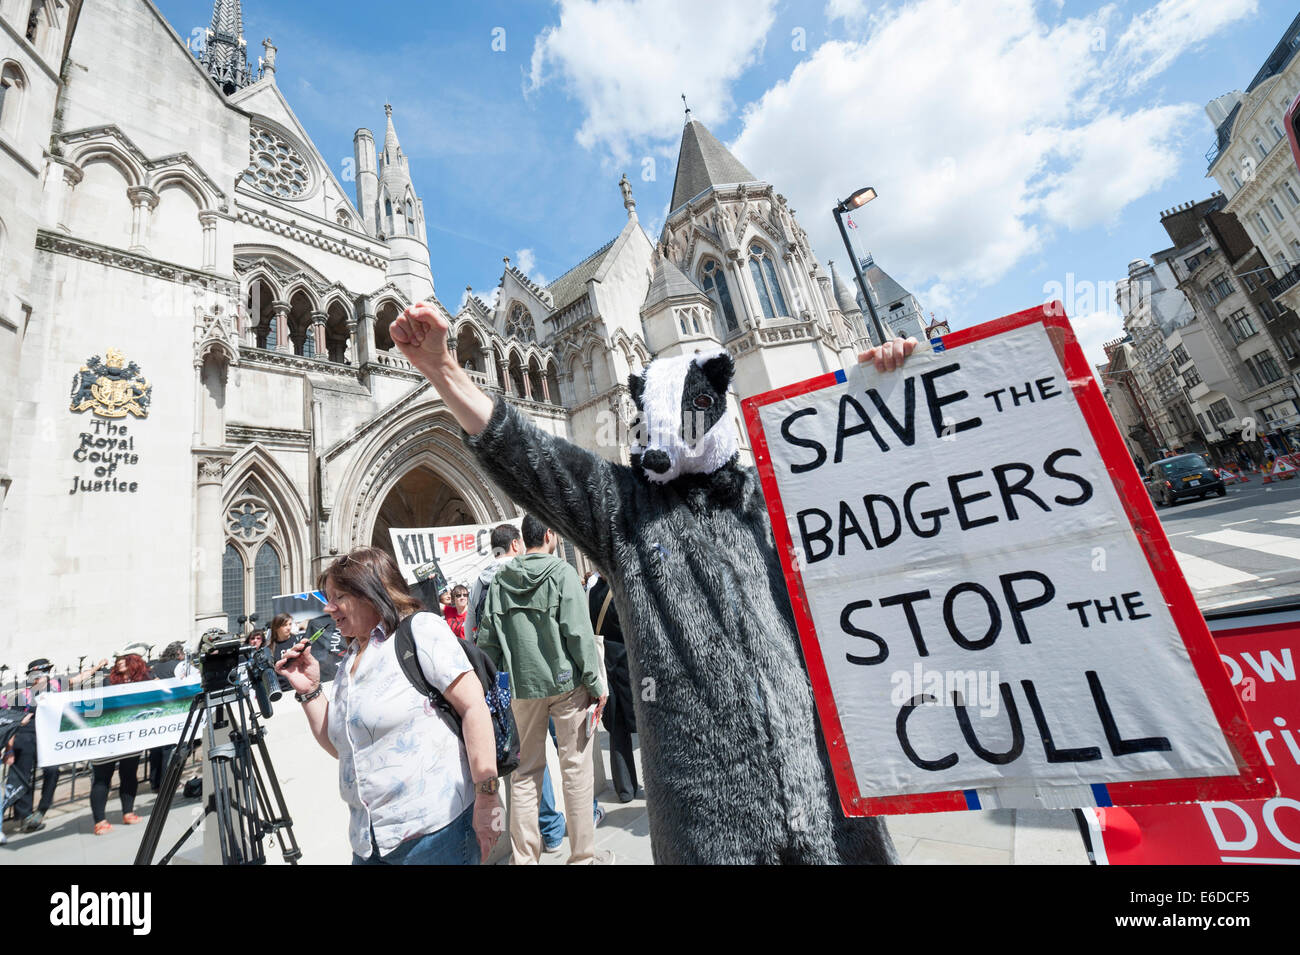 Royal Courts of Justice, London, UK. 21st August 2014. A large crowd of anti badger cull protesters gathered outside the Royal Courts of Justice as The Badger Trust was in court with a new legal challenge over the government’s badger cull policy. The organisation wants a High Court ruling stating that there has been an unlawful failure to put in place an independent panel of experts to oversee this year’s planned cull in Gloucestershire and Somerset. Credit:  Lee Thomas/Alamy Live News Stock Photo